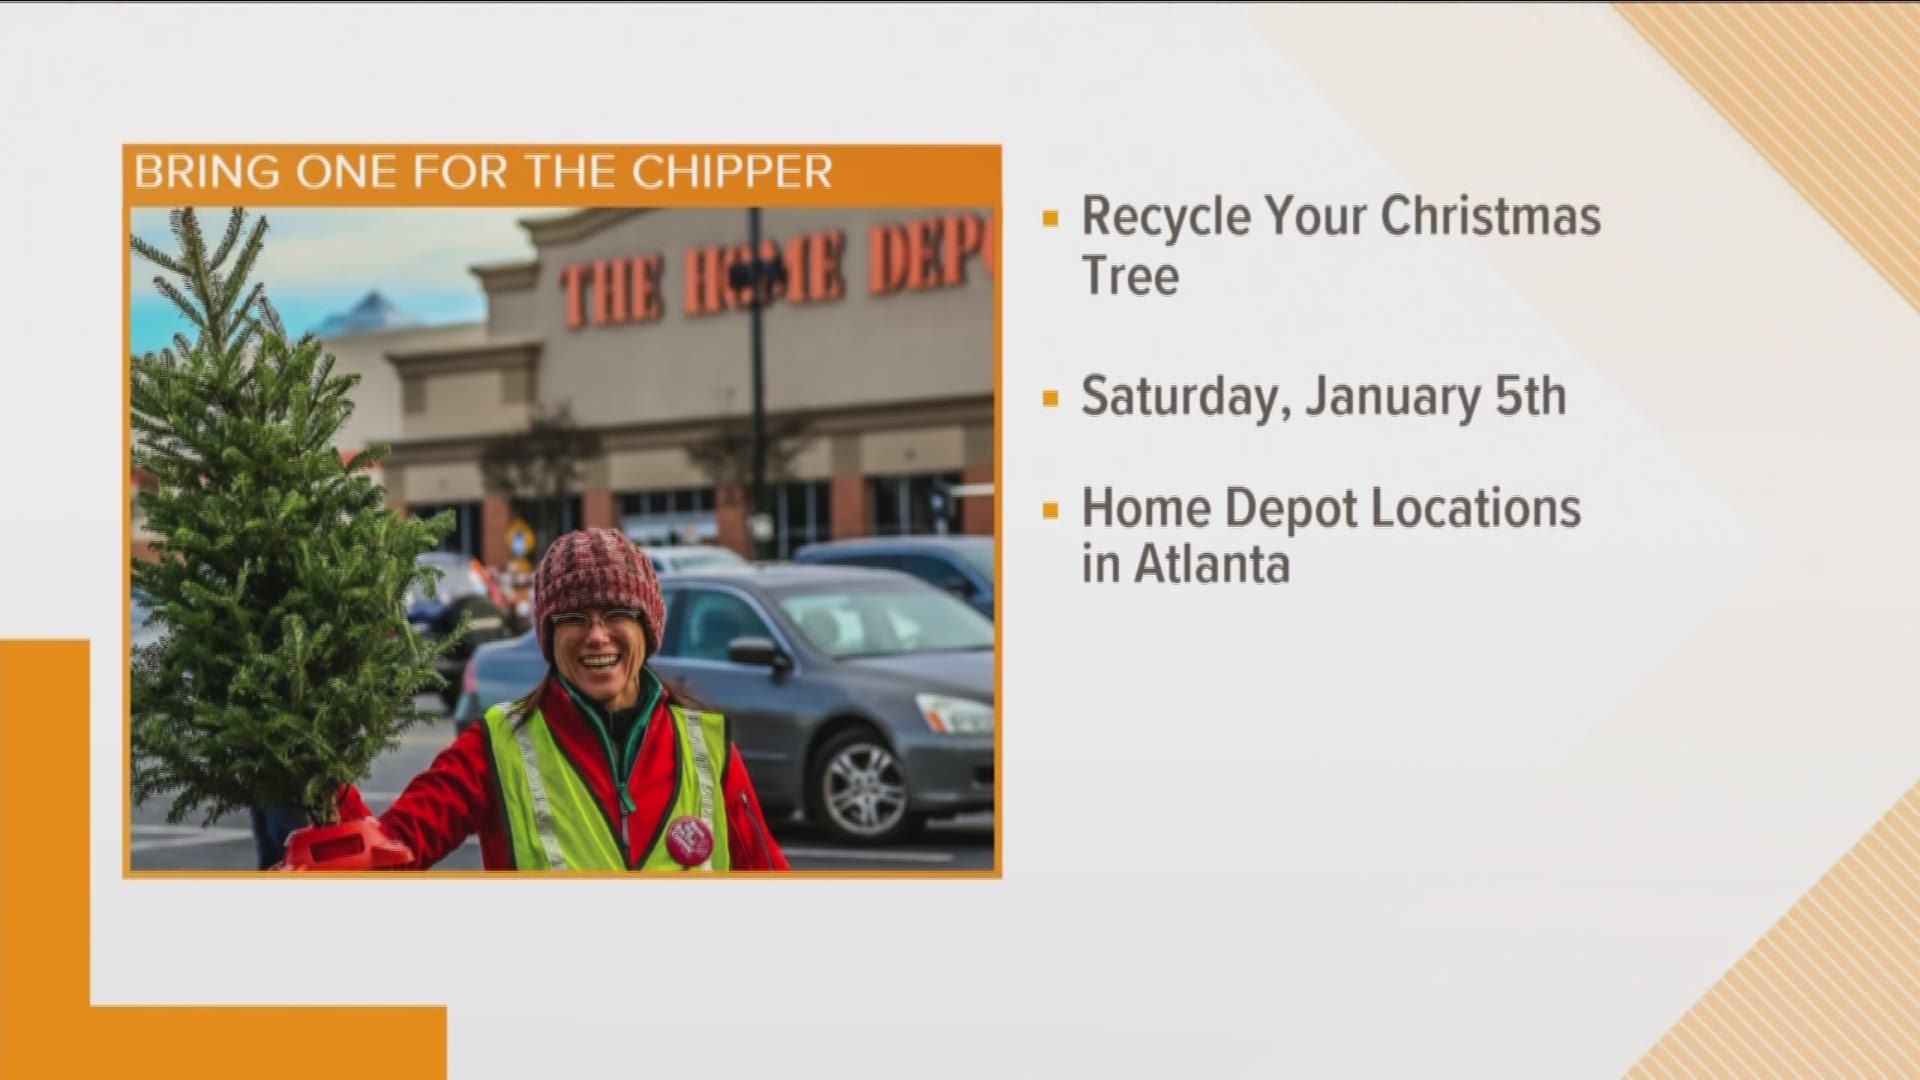 Bring One of the Chipper is the largest Christmas Tree recycling programs in Atlanta.